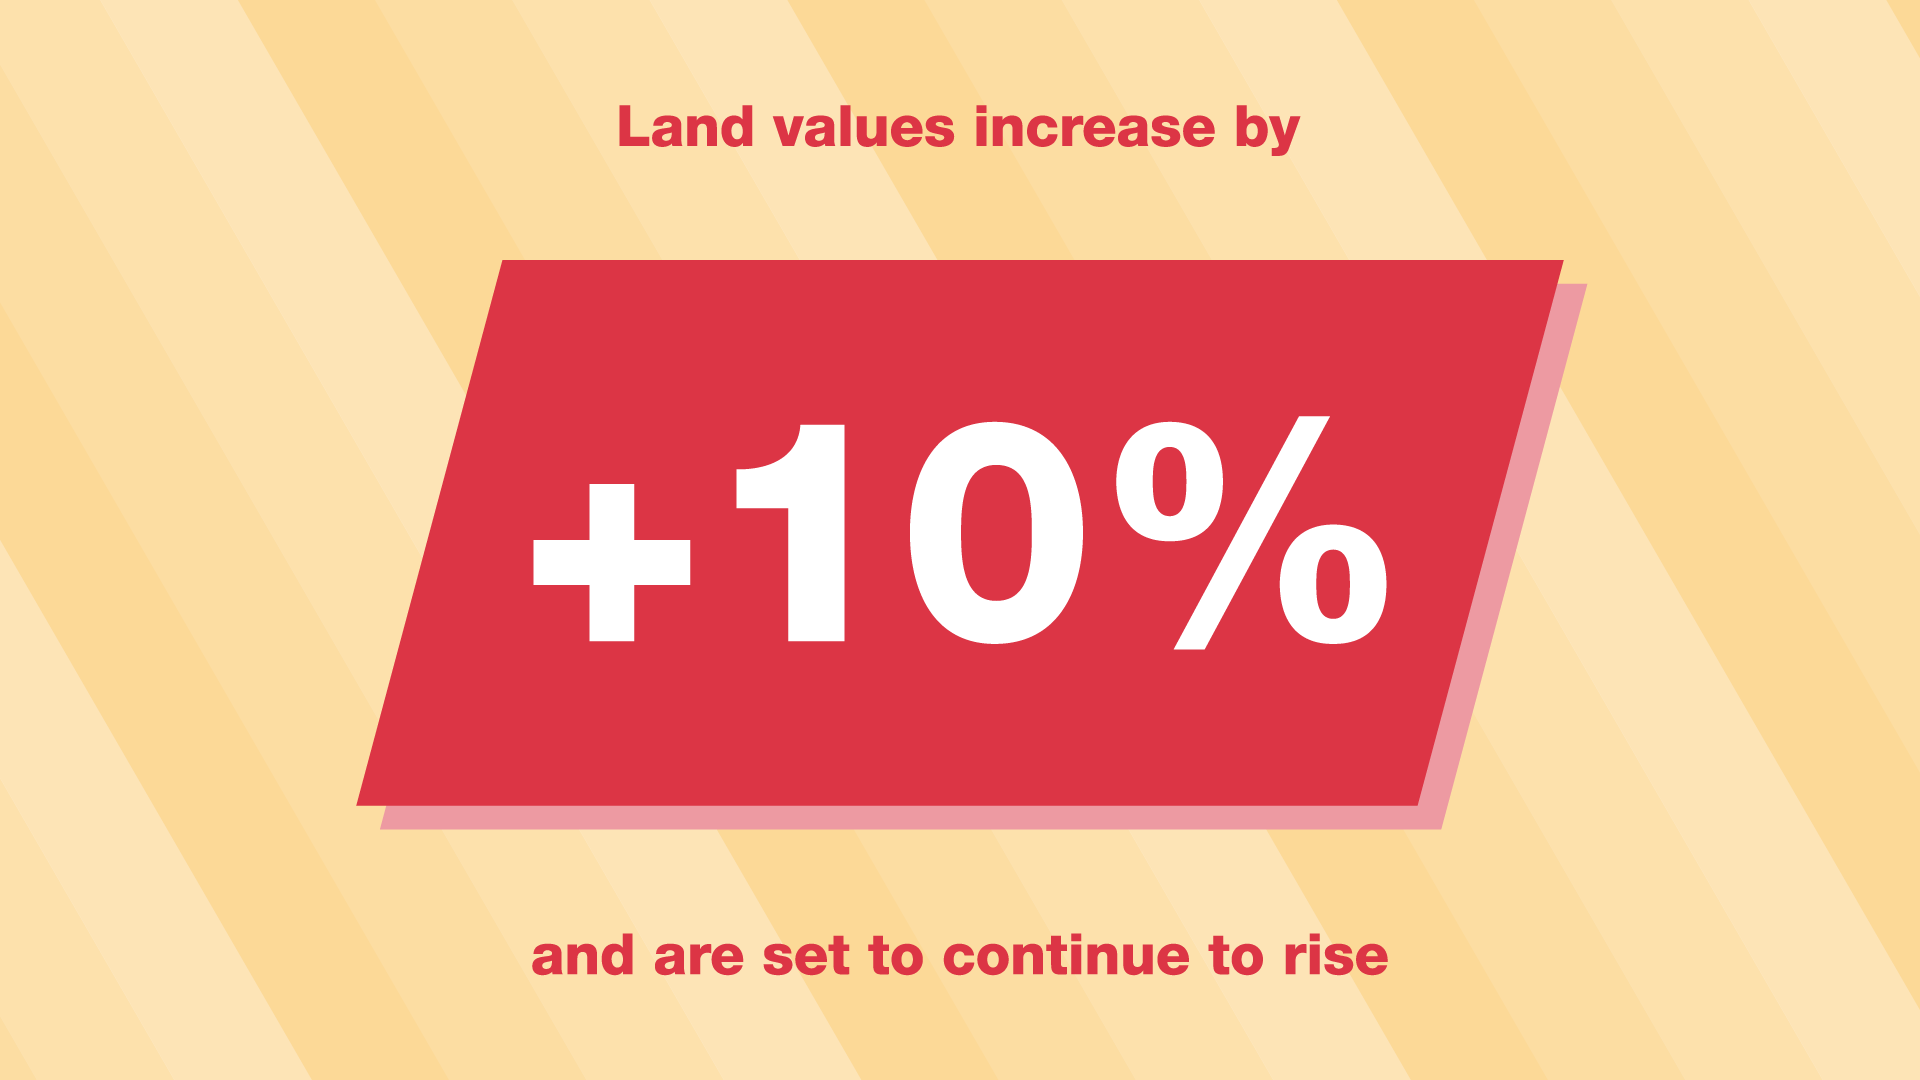 Land values increase by 10%